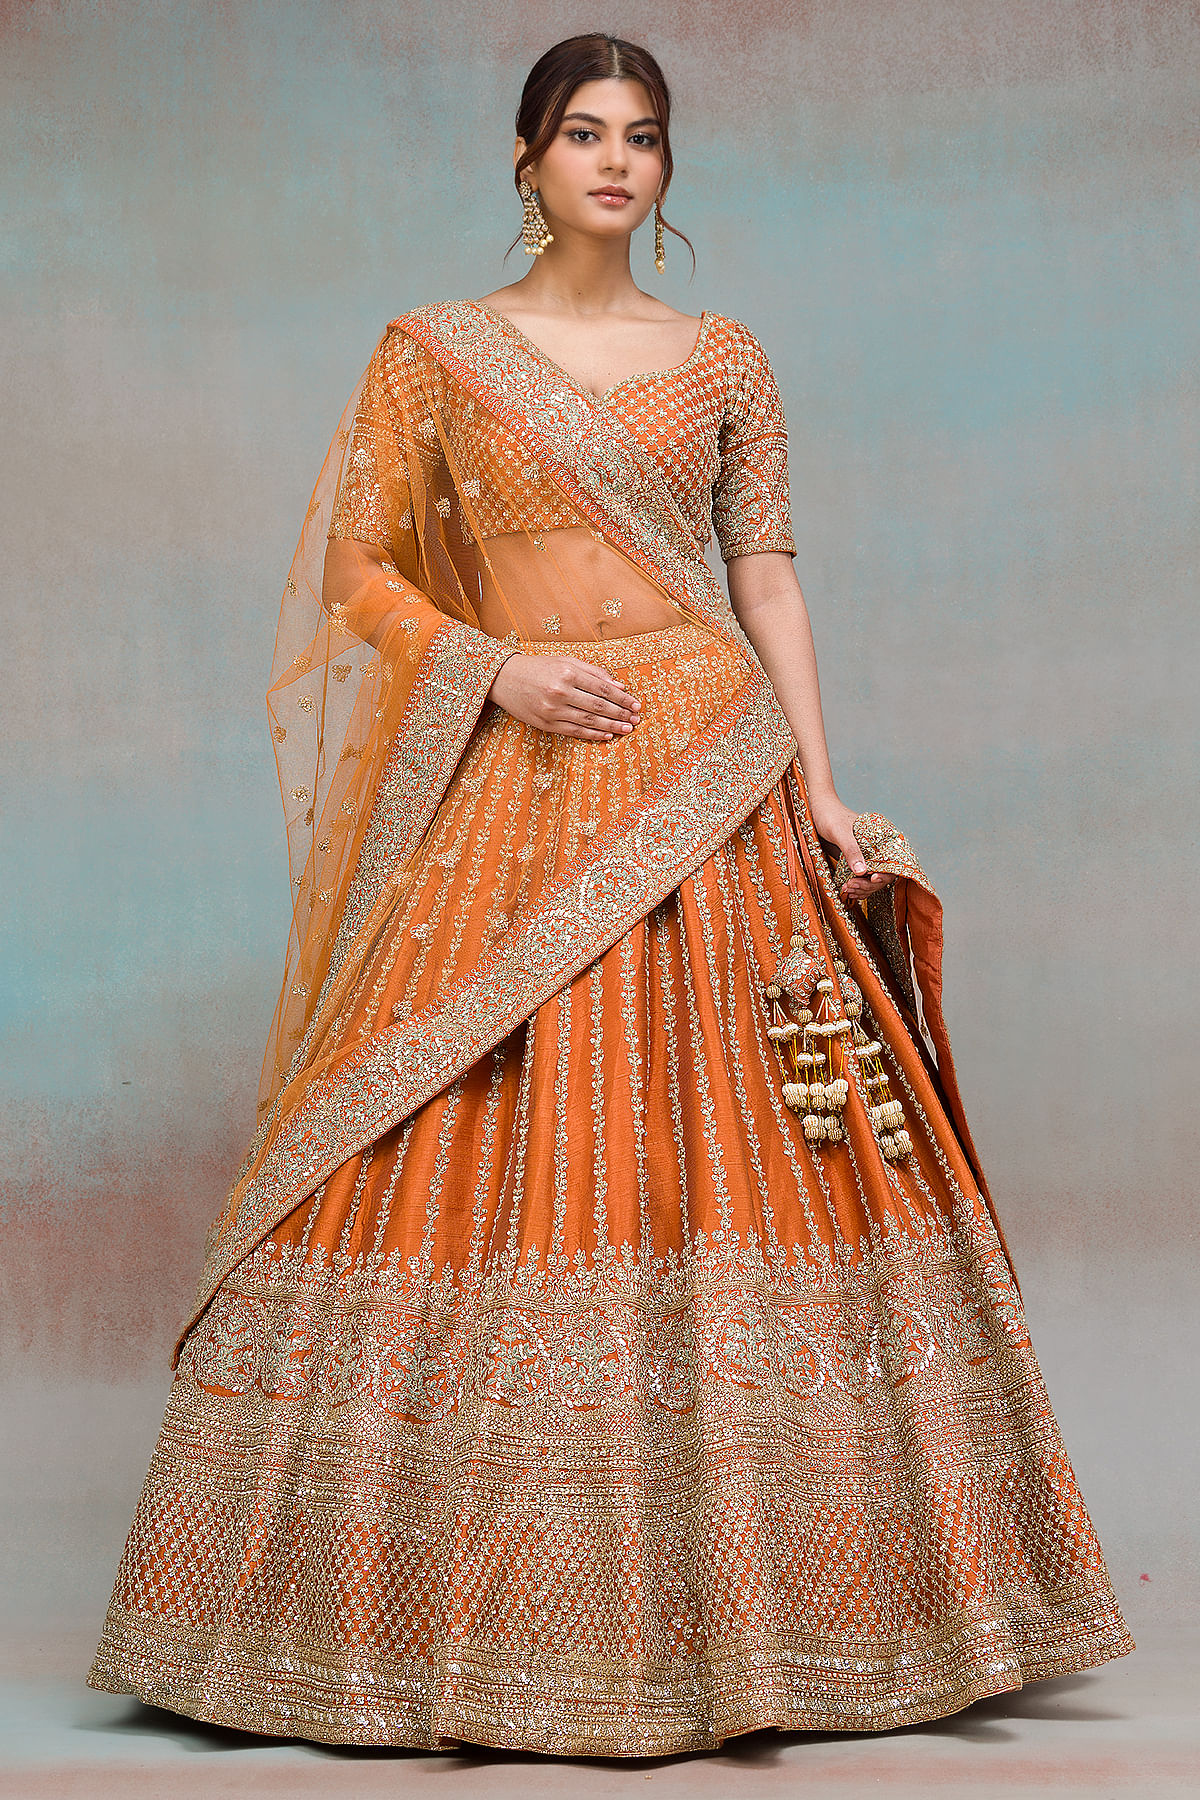 This bride is stunning in this rust orange lehenga by @sabyasachiofficial!  The lehenga is beautifully… | Indian bridal outfits, Indian wedding dress,  Indian dresses